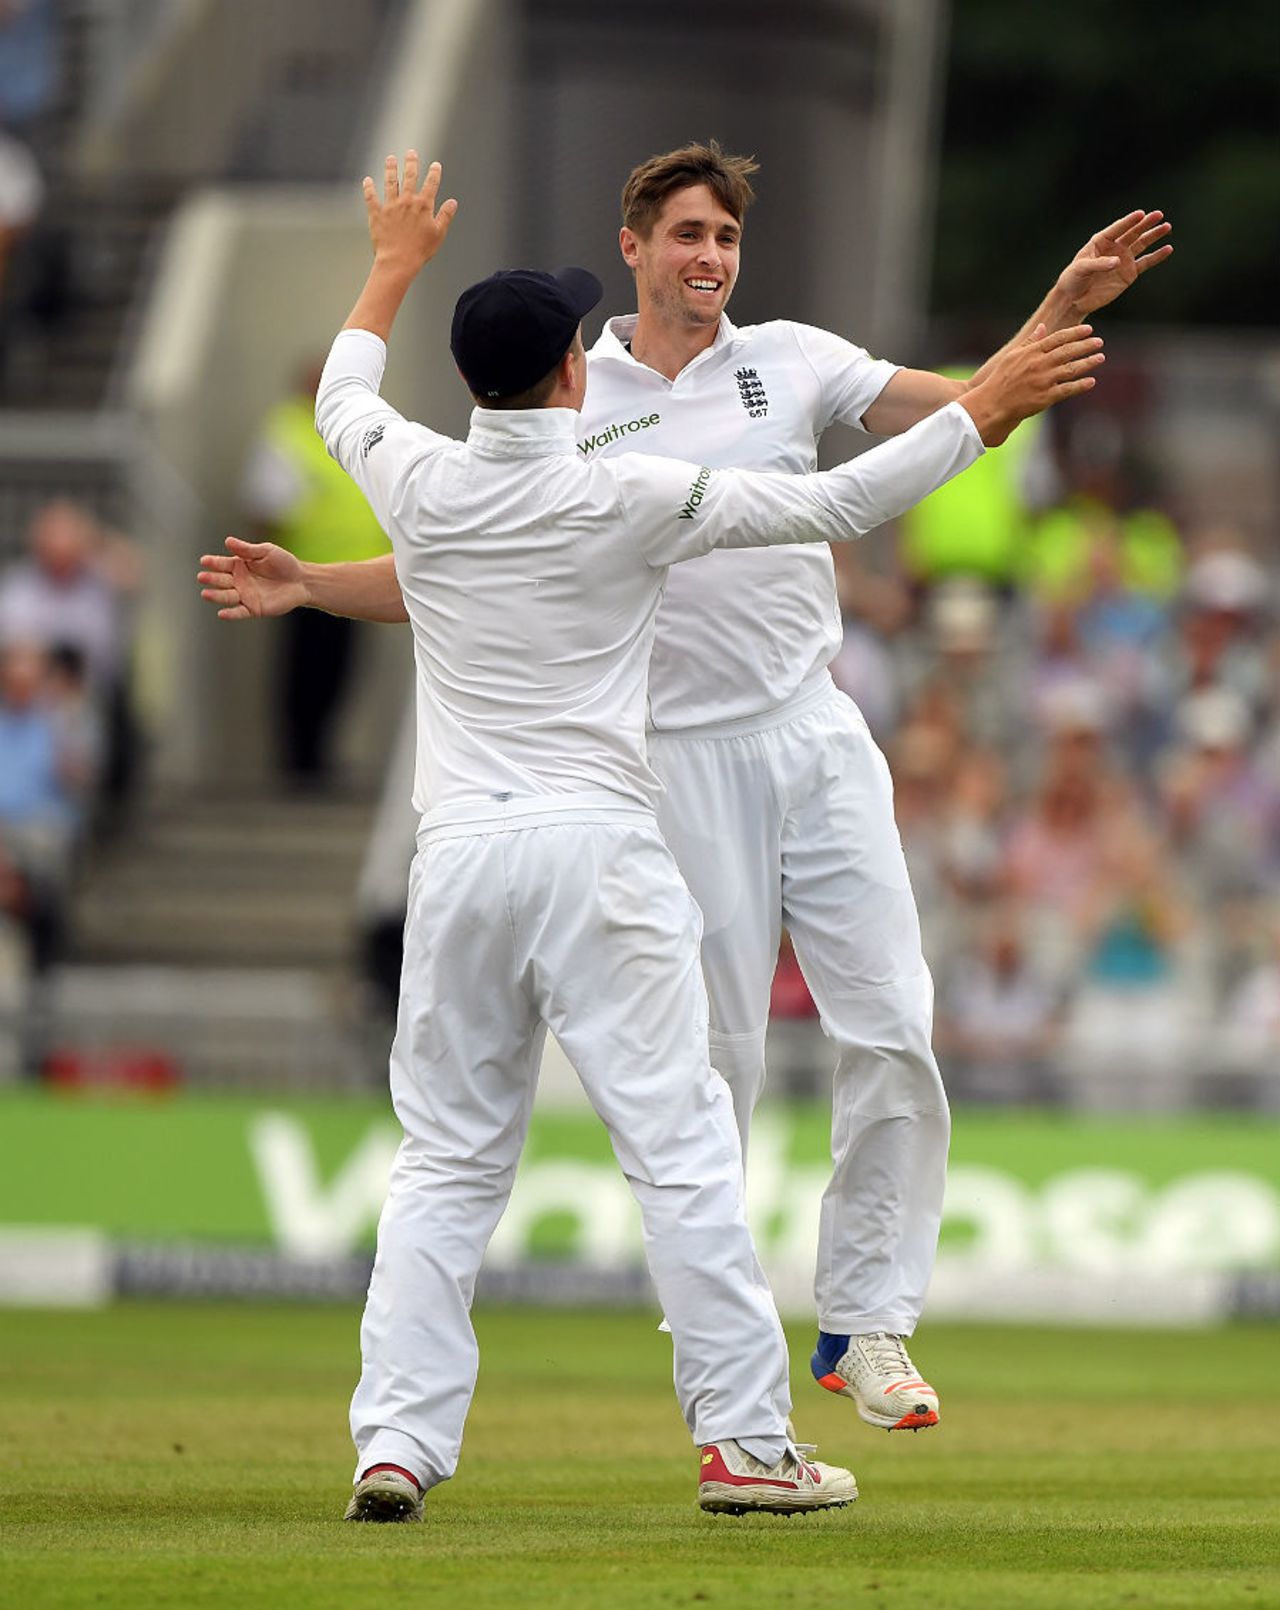 Chris Woakes claimed the wicket of Mohammad Hafeez, England v Pakistan, 2nd Investec Test, Old Trafford, 2nd day, July 23, 2016